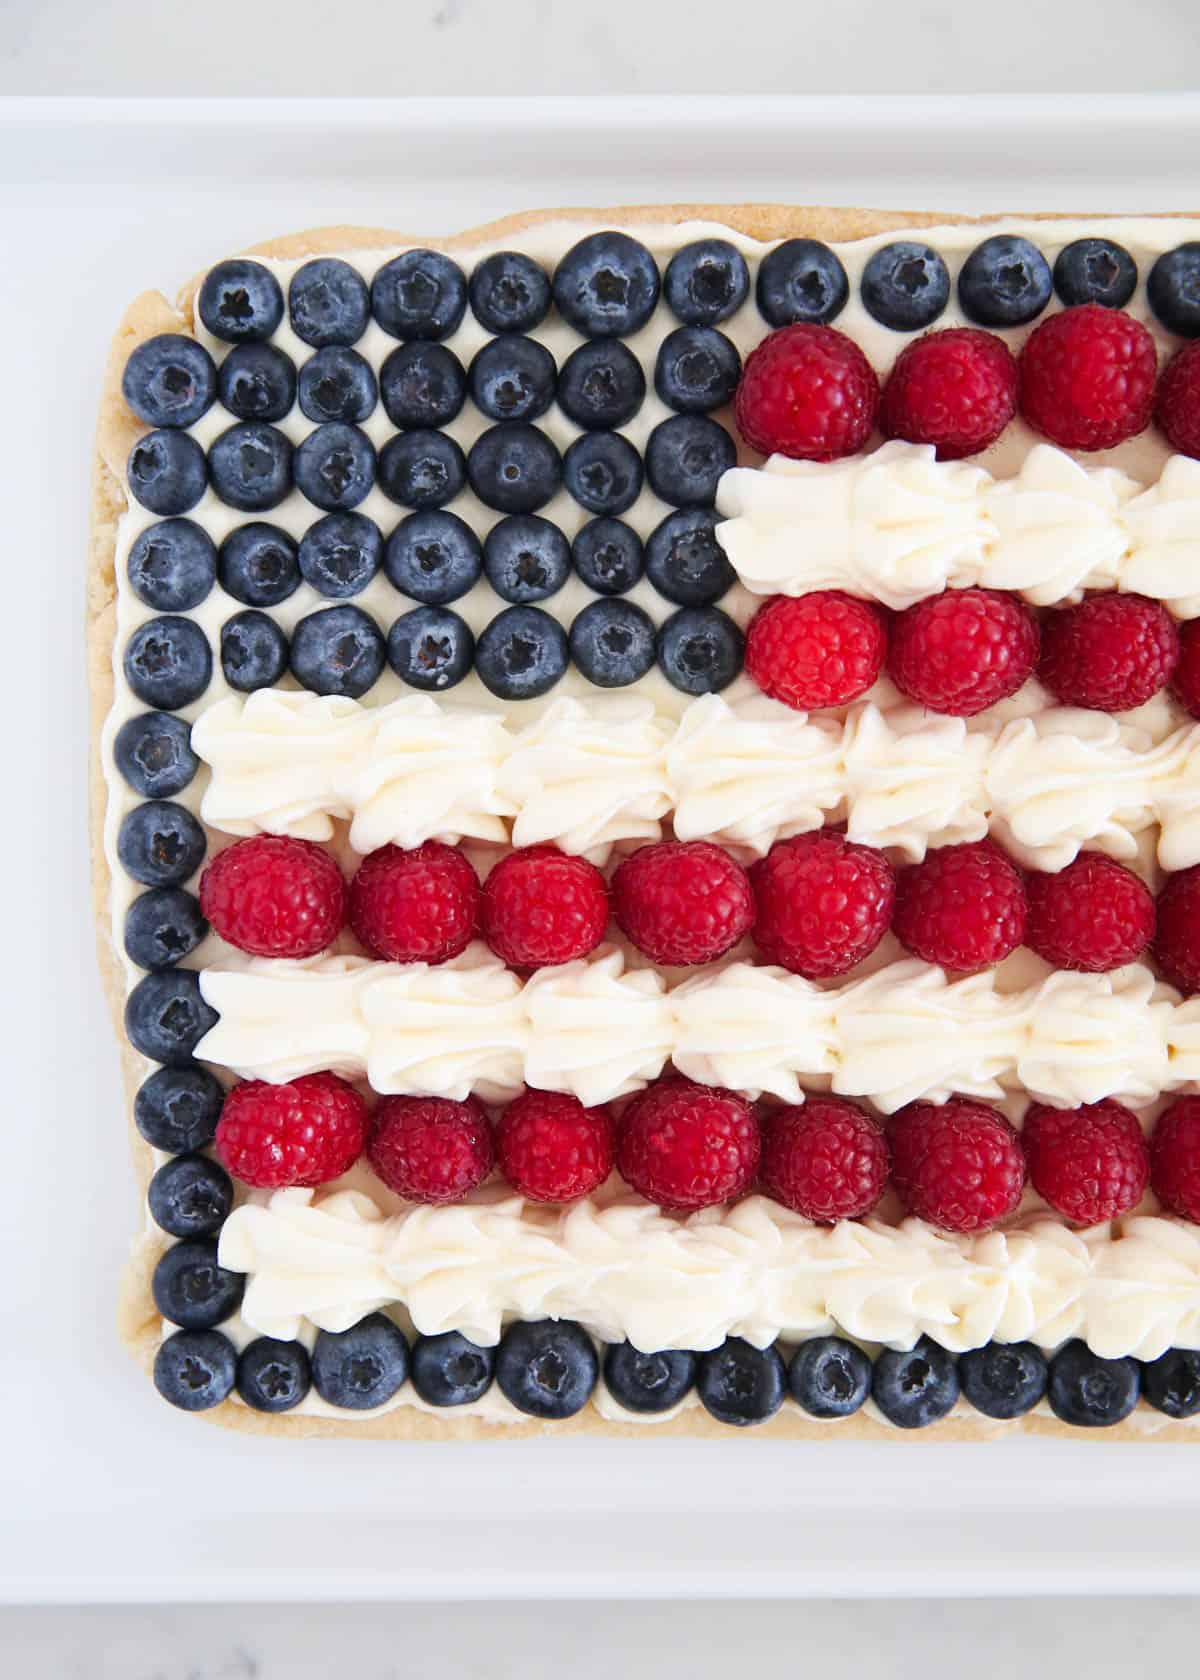 What You Need To Make 4th of July Fruit Pizza